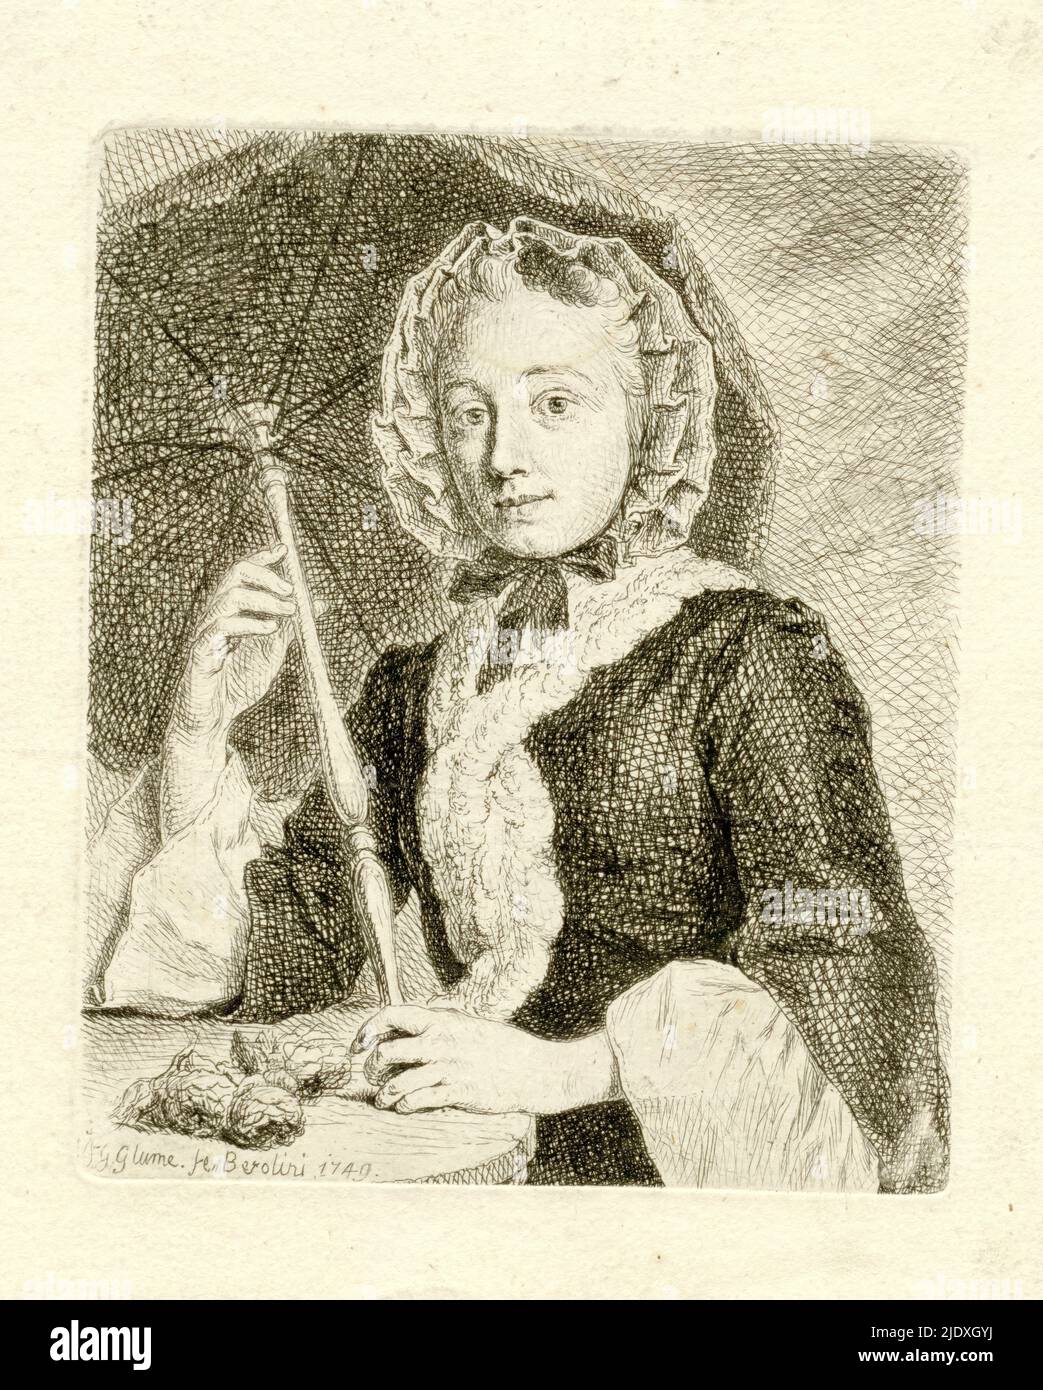 Woman with Parasol, Portrait of Charlotte Dorothea, born Copcovius (1724-1776), as a young woman with bonnet on head, parasol in hand, standing at a round table. She was the wife of Friedrich Christian Glume, the artist's brother. After his death in 1753, a few years after the print was published, she remarried his other brother Carl Philipp., print maker: Johann Gottlieb Glume, (mentioned on object), Berlin, 1749, paper, etching, height 130 mm × width 108 mm Stock Photo